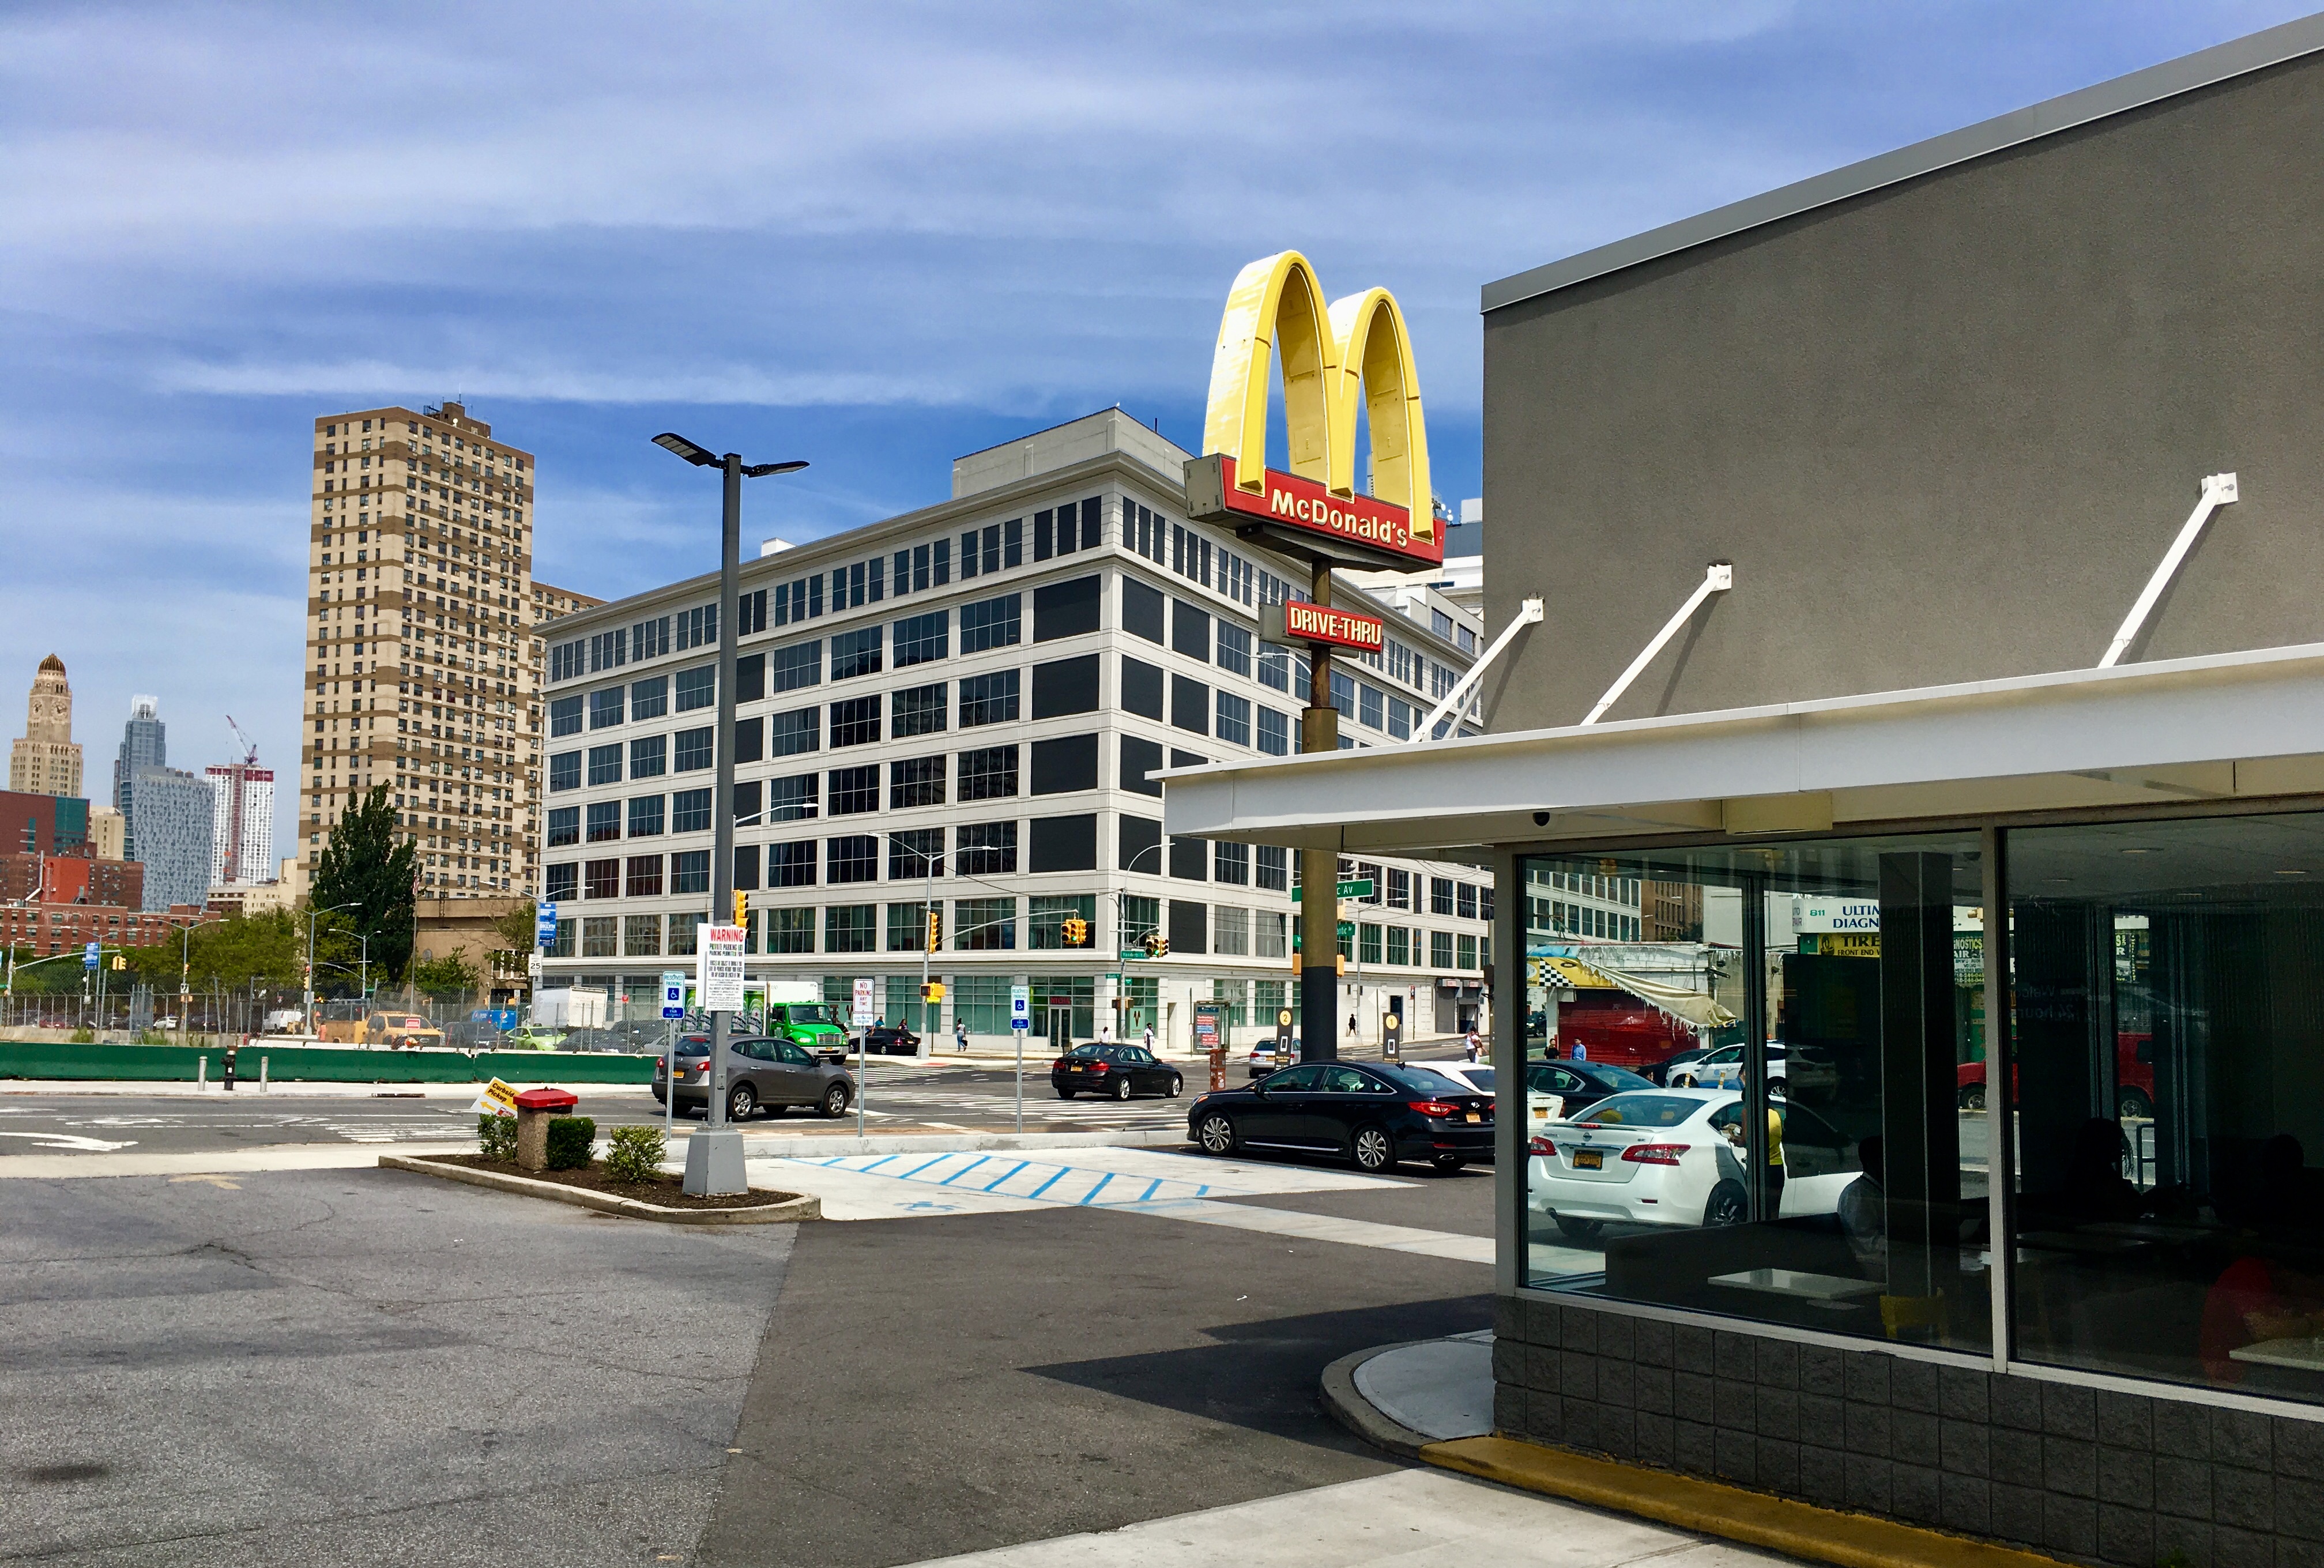 The McDonald’s is located in the proposed M-Crown zoning district. Eagle photo by Lore Croghan